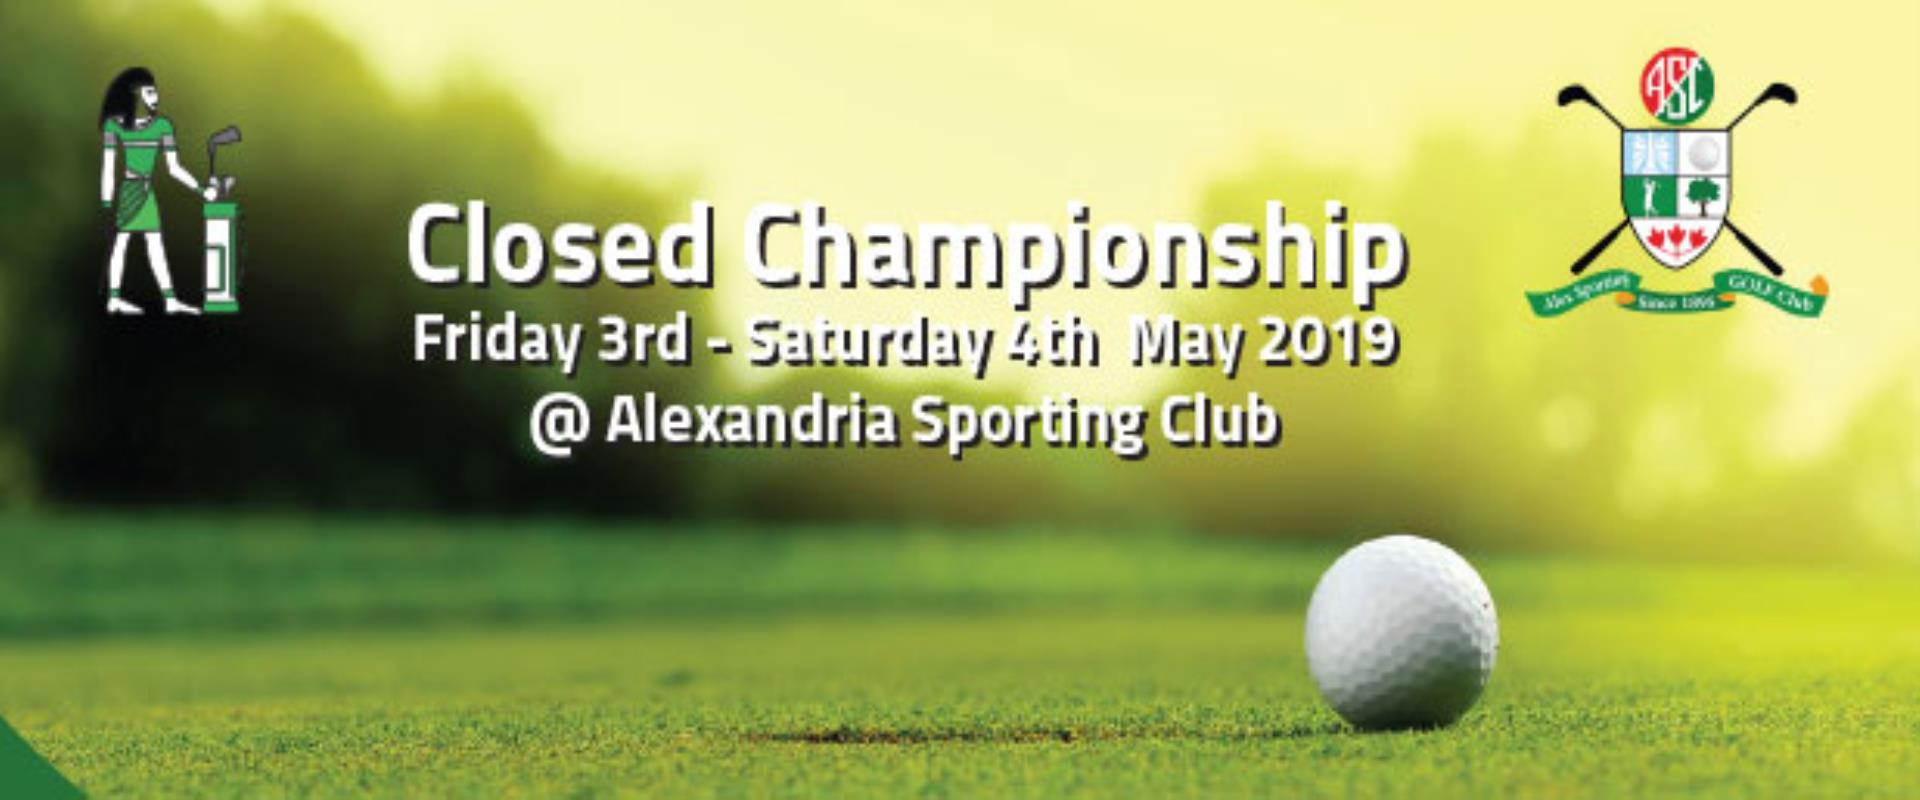 Entries are being accepted for The Closed Championship @ Alexandria